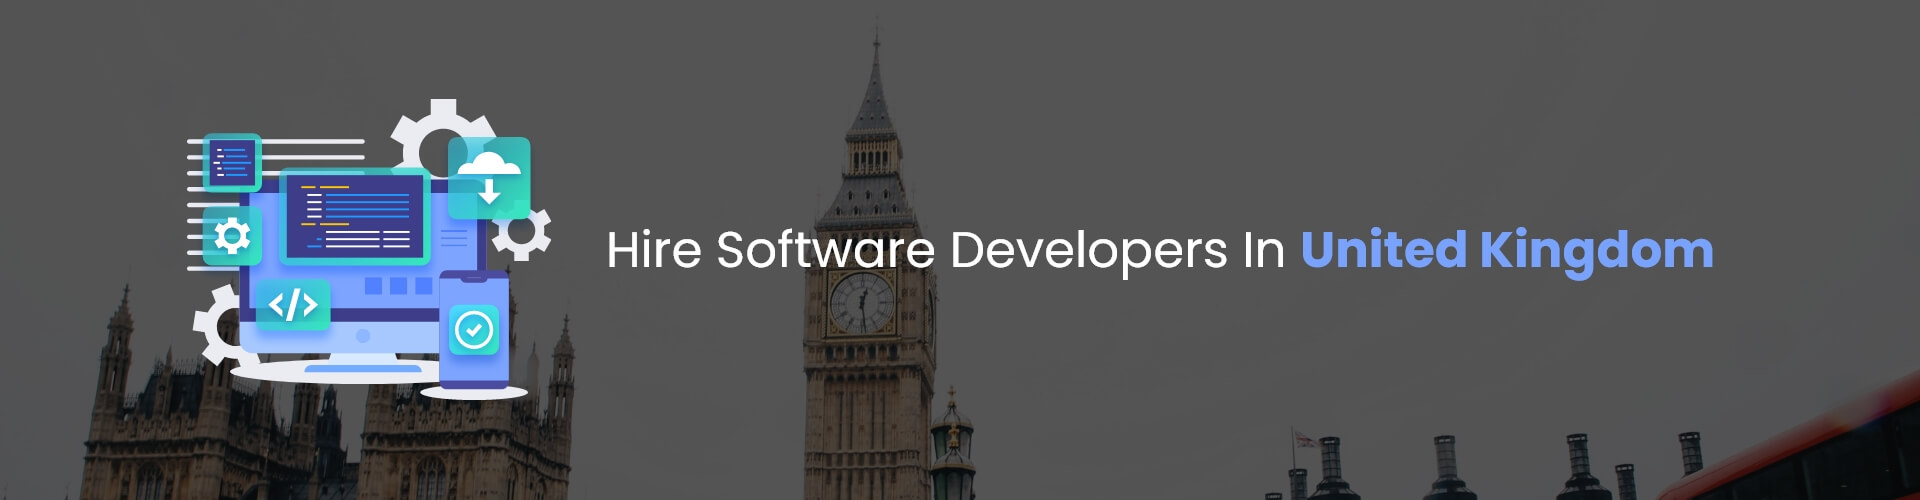 hire software developers in united kingdom